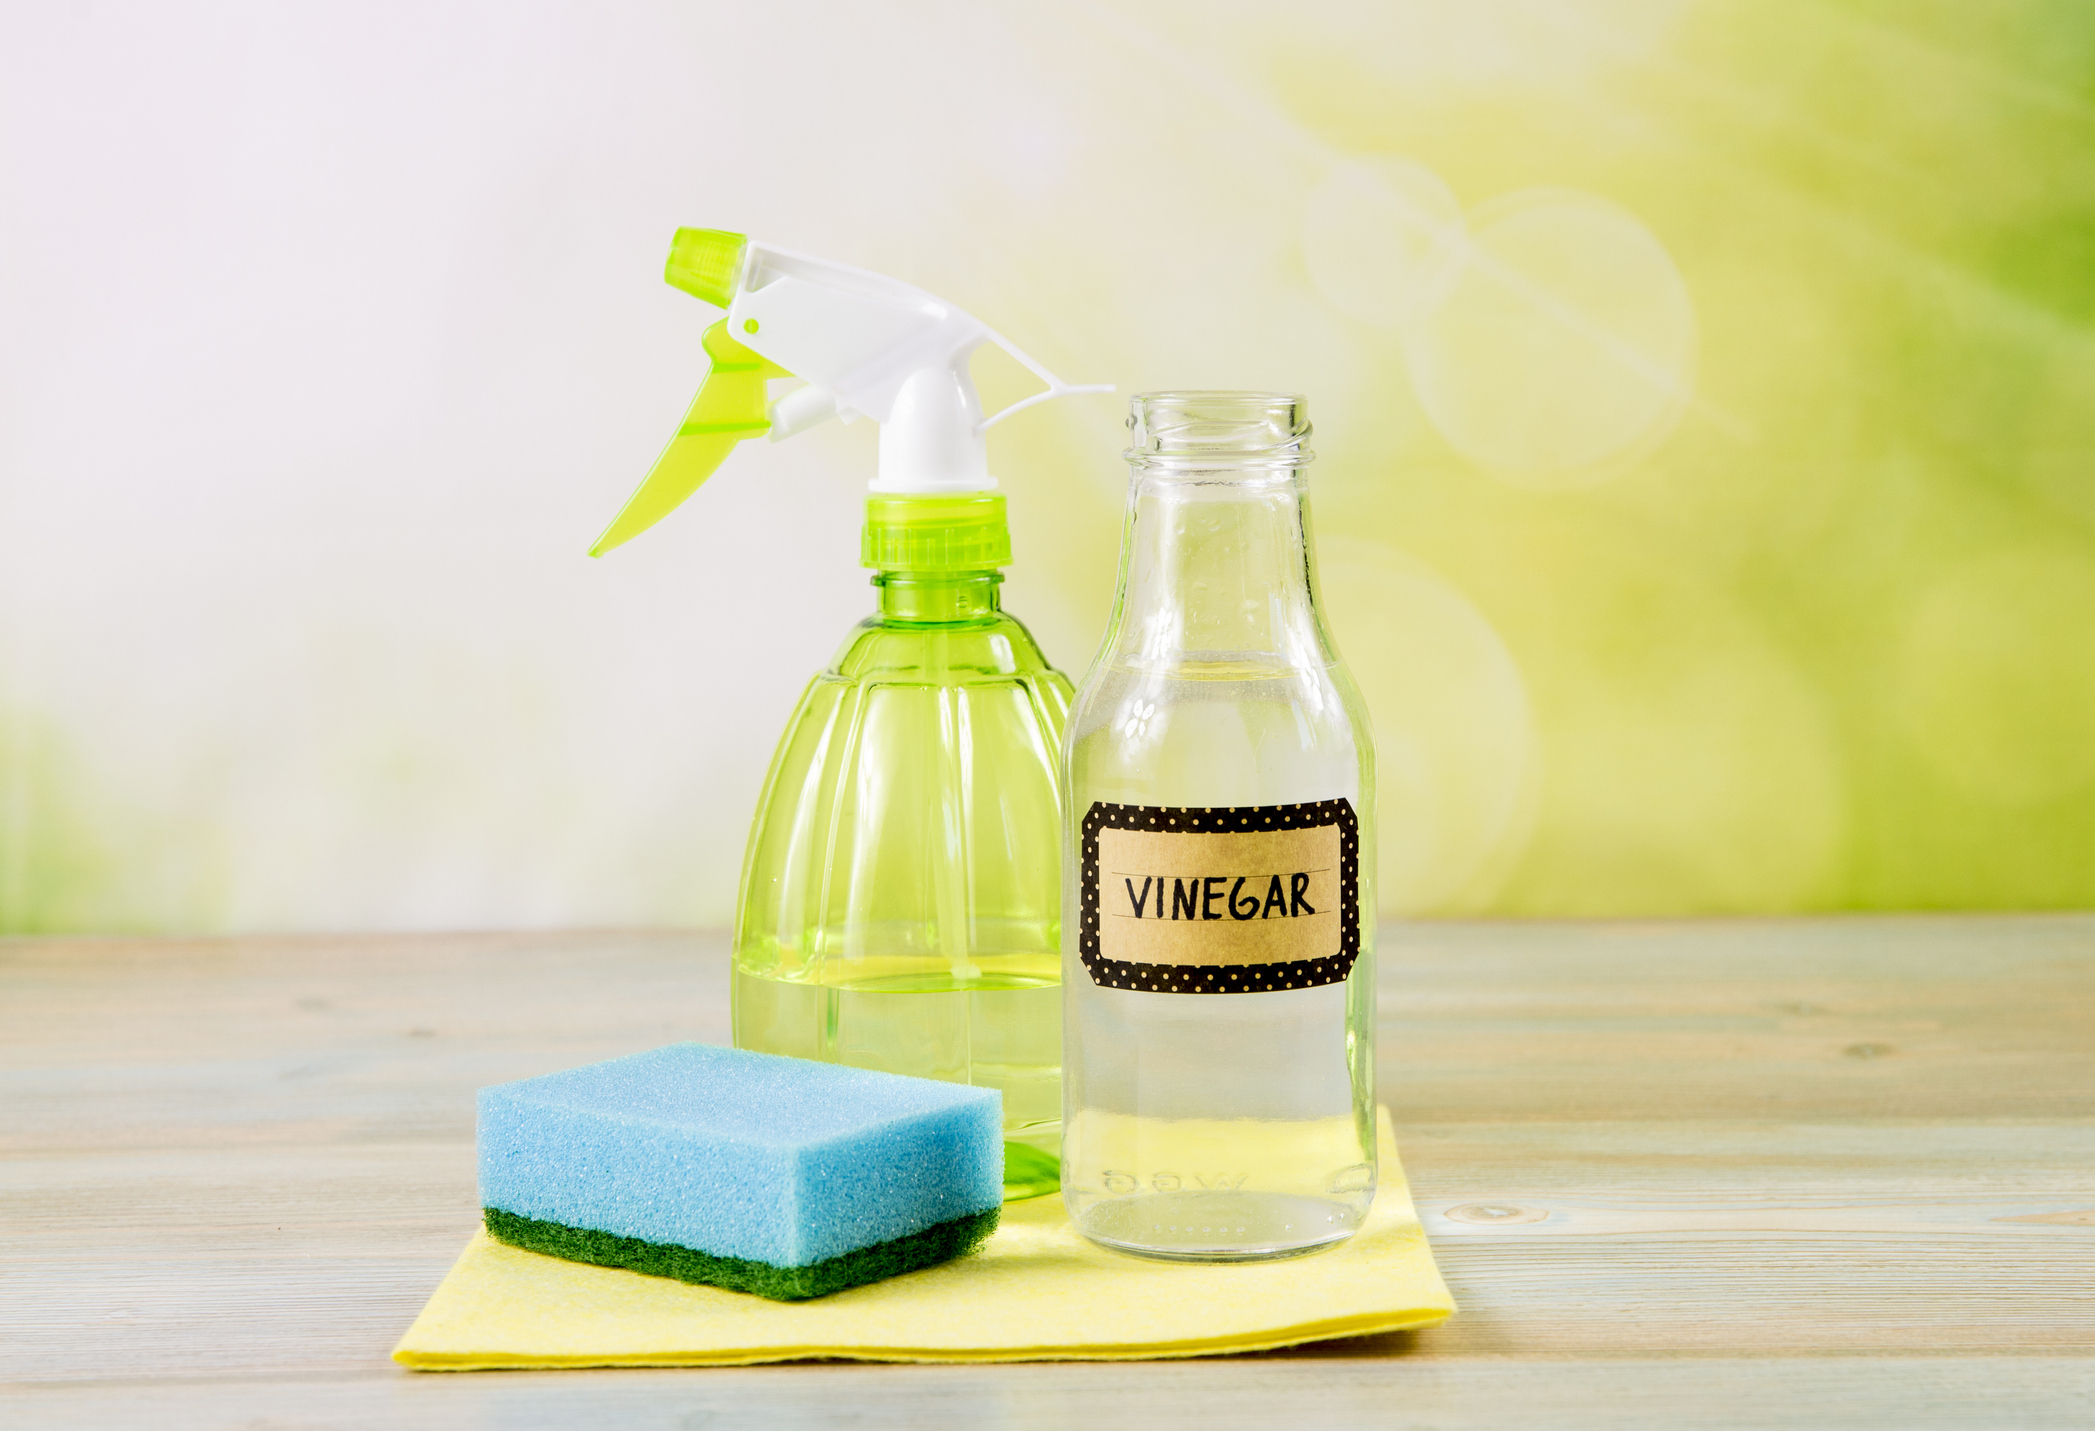 A bottle of vinegar next to a sponge and towel for cleaning